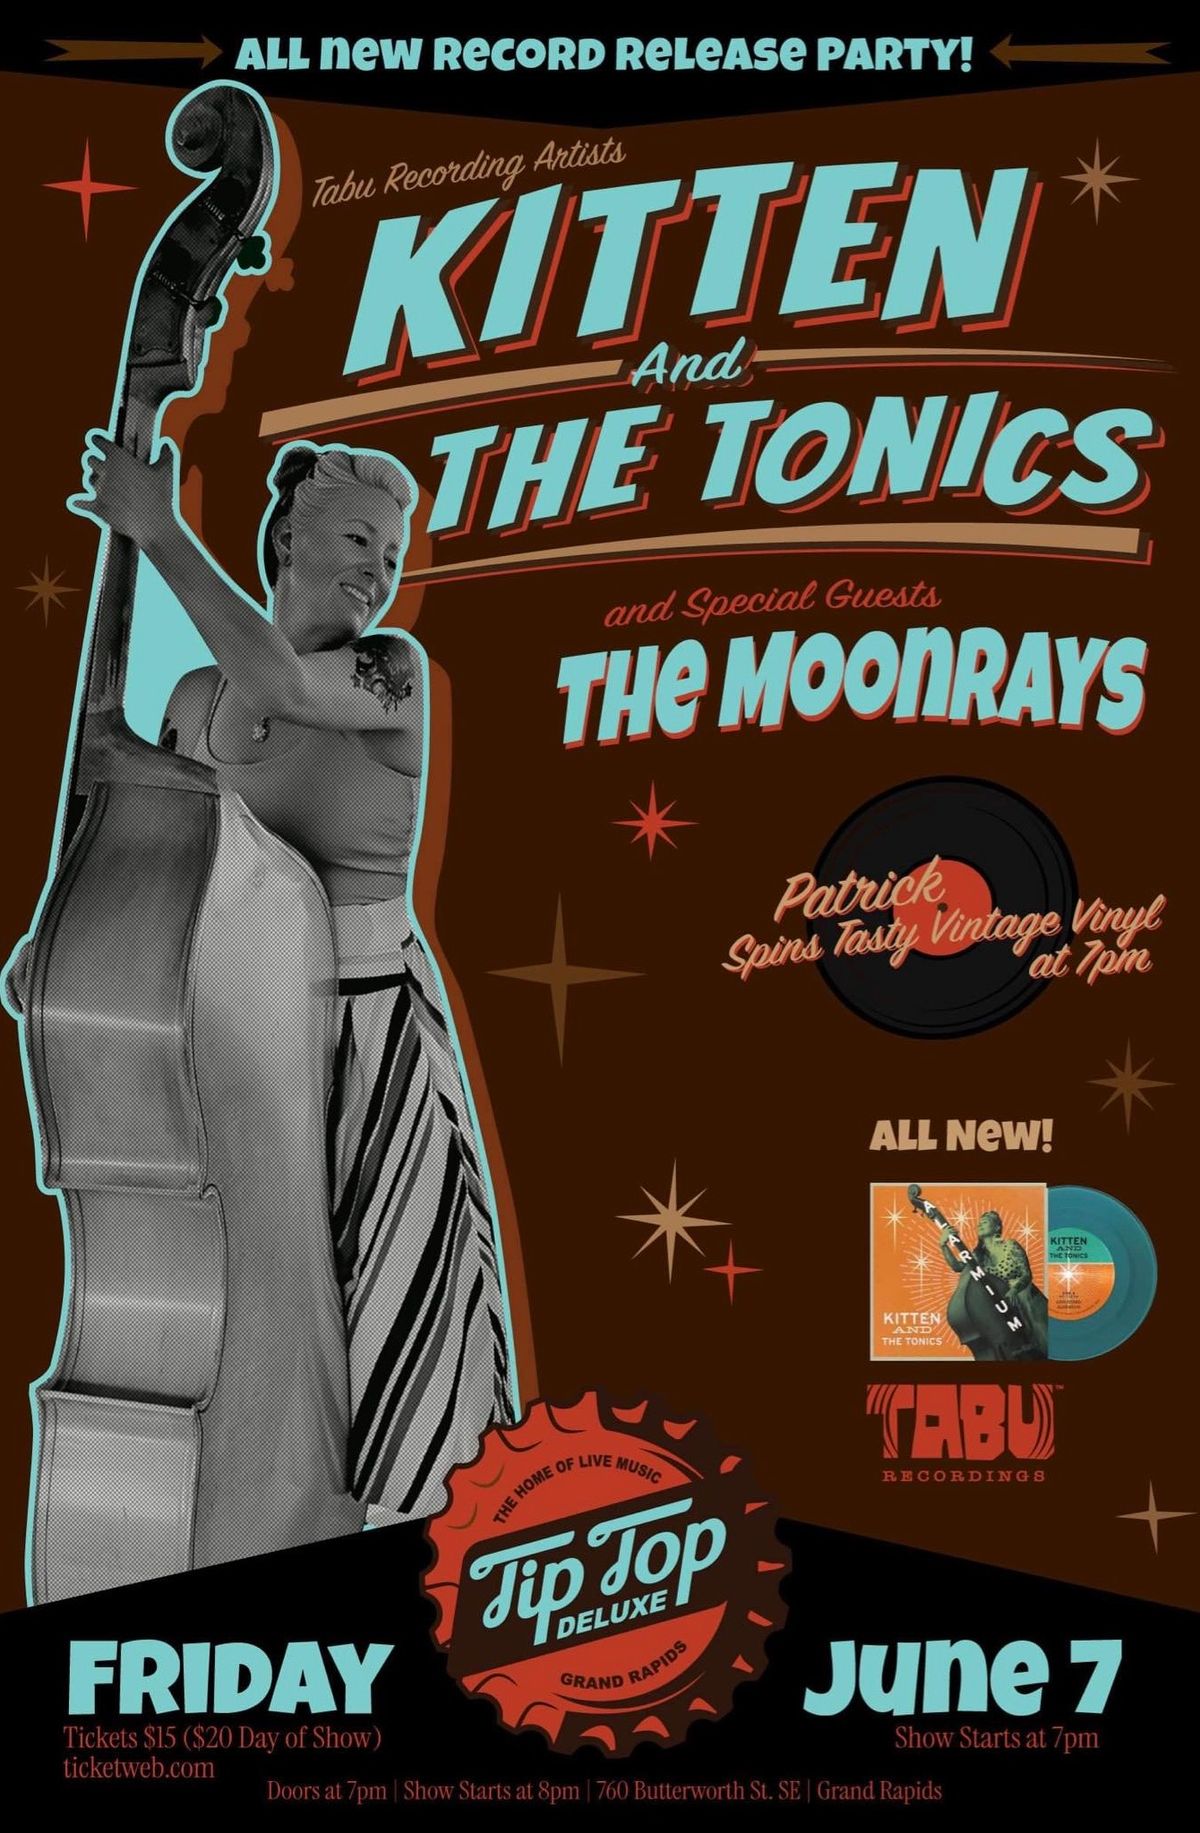 Kitten & The Tonics Record Release Party with The Moonrays and Patrick Spinning Vintage Vinyl